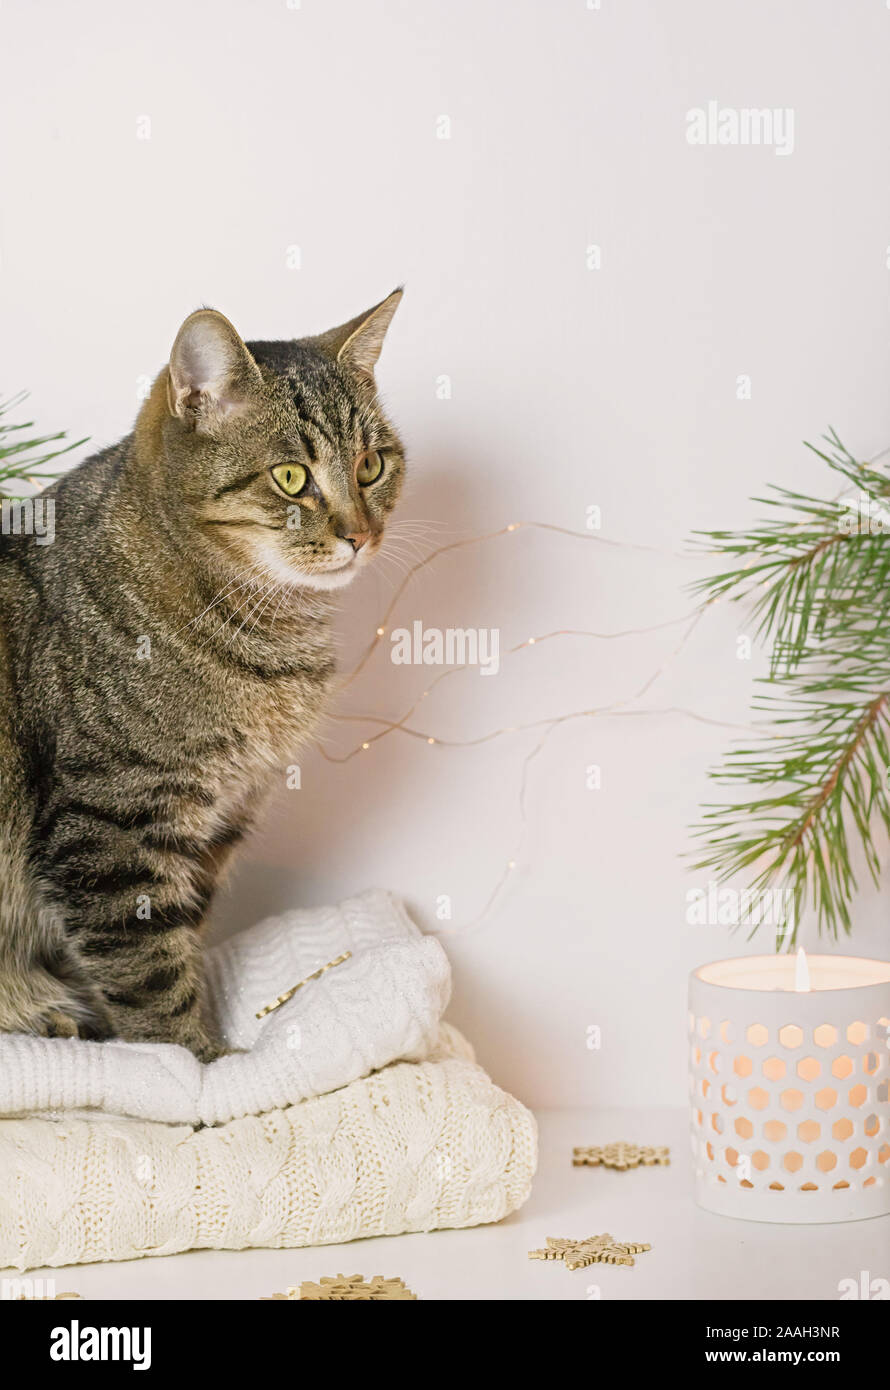 Pets, Christmas and cosiness concept - a tabby cat sitting on a warm sweater in a Christmas atmosphere. Close up. Stock Photo